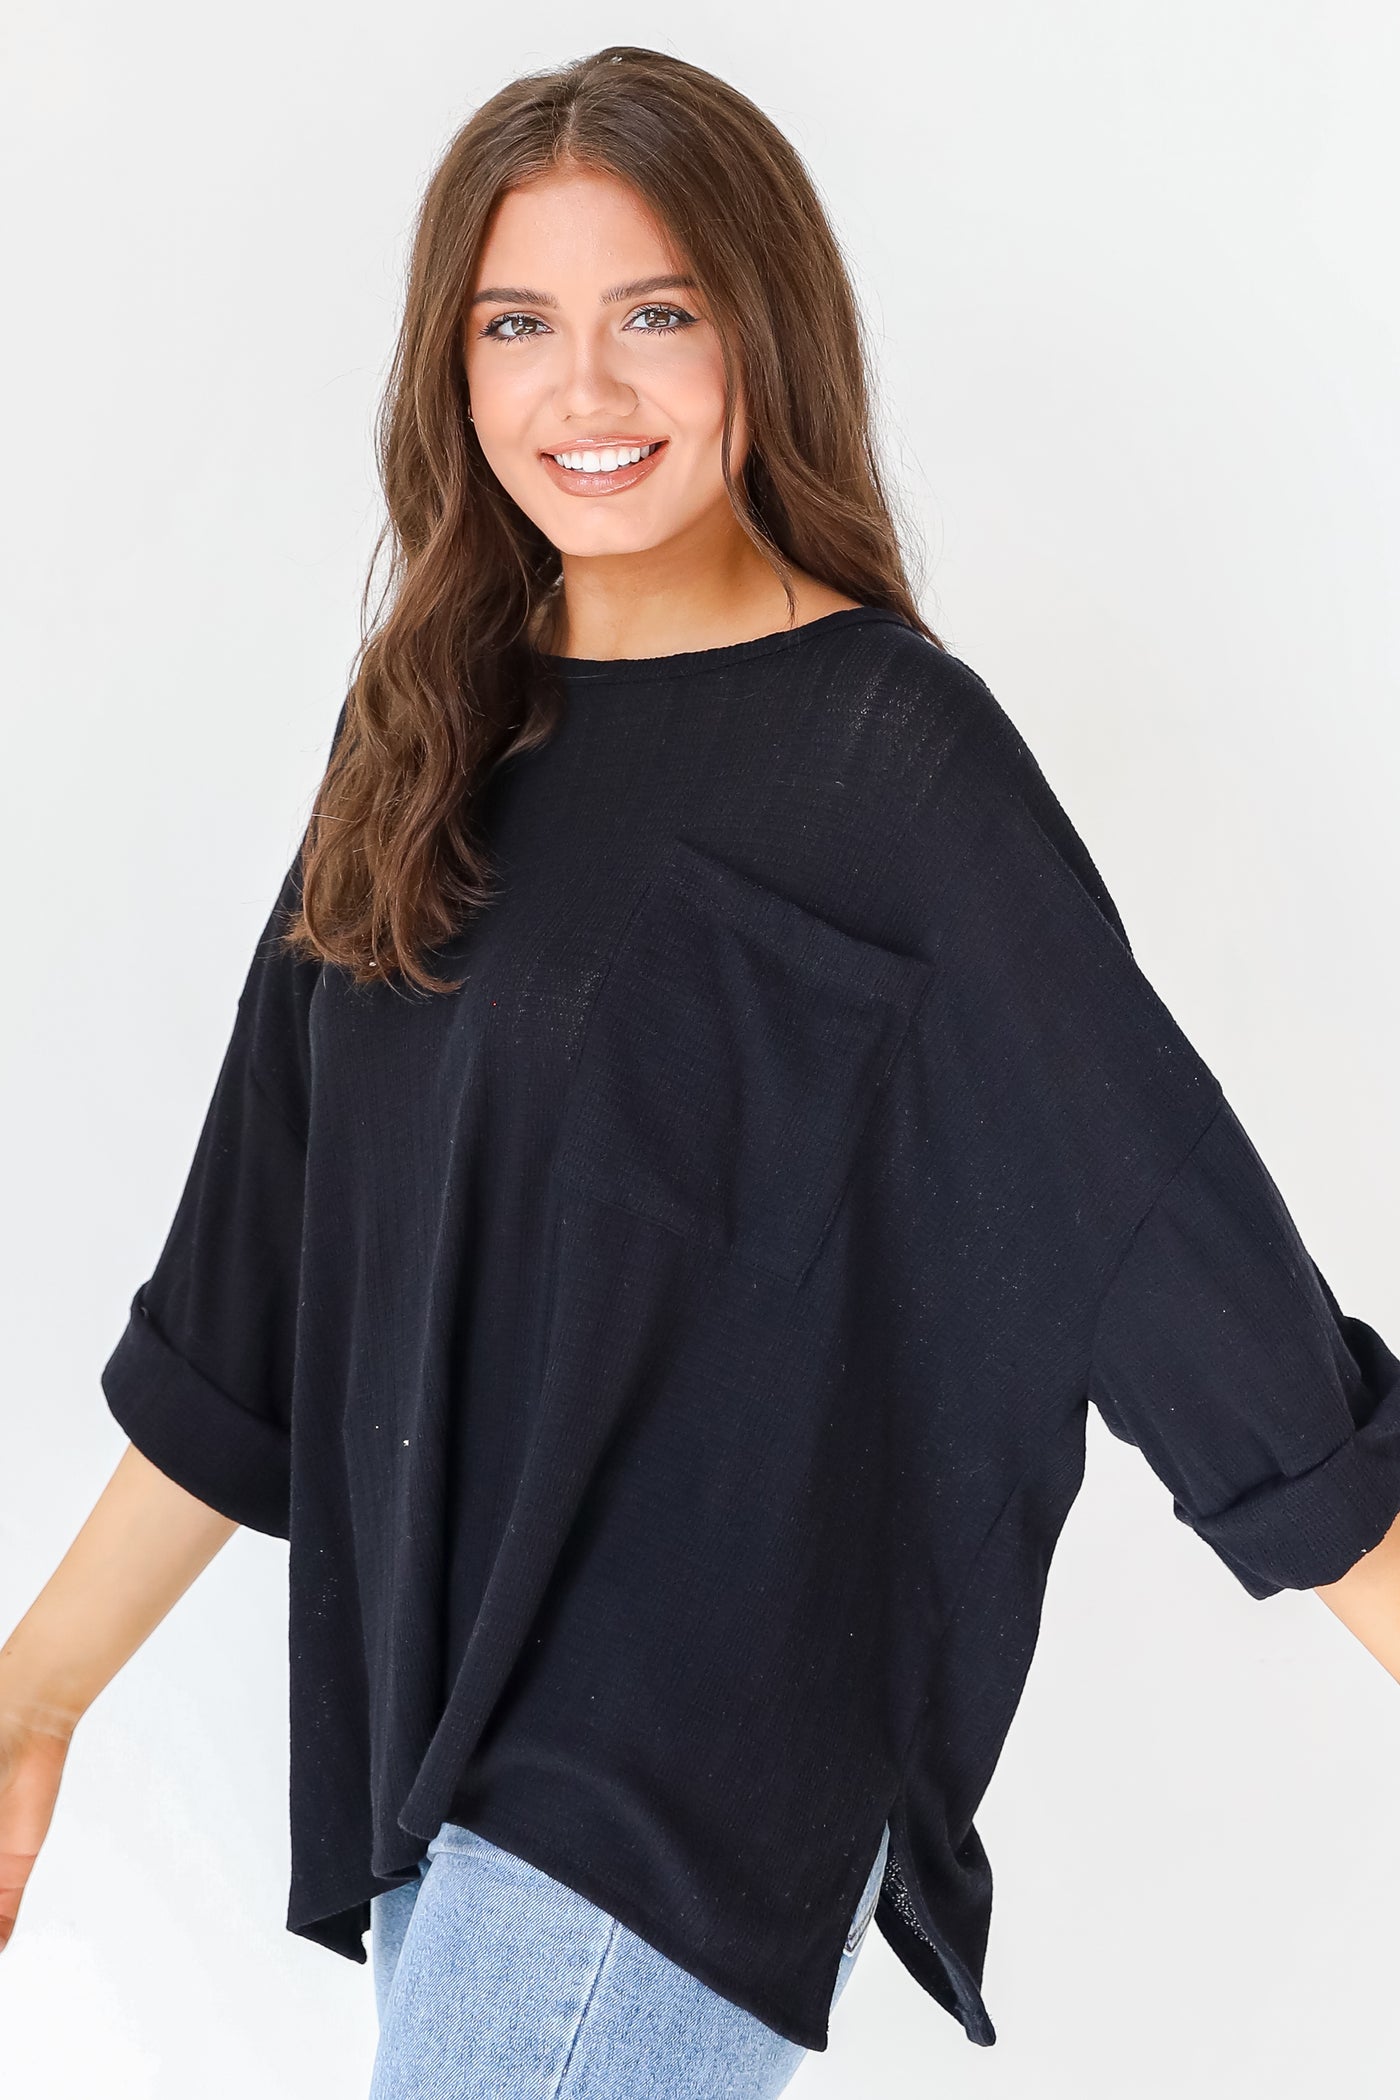 Knit Top in black side view